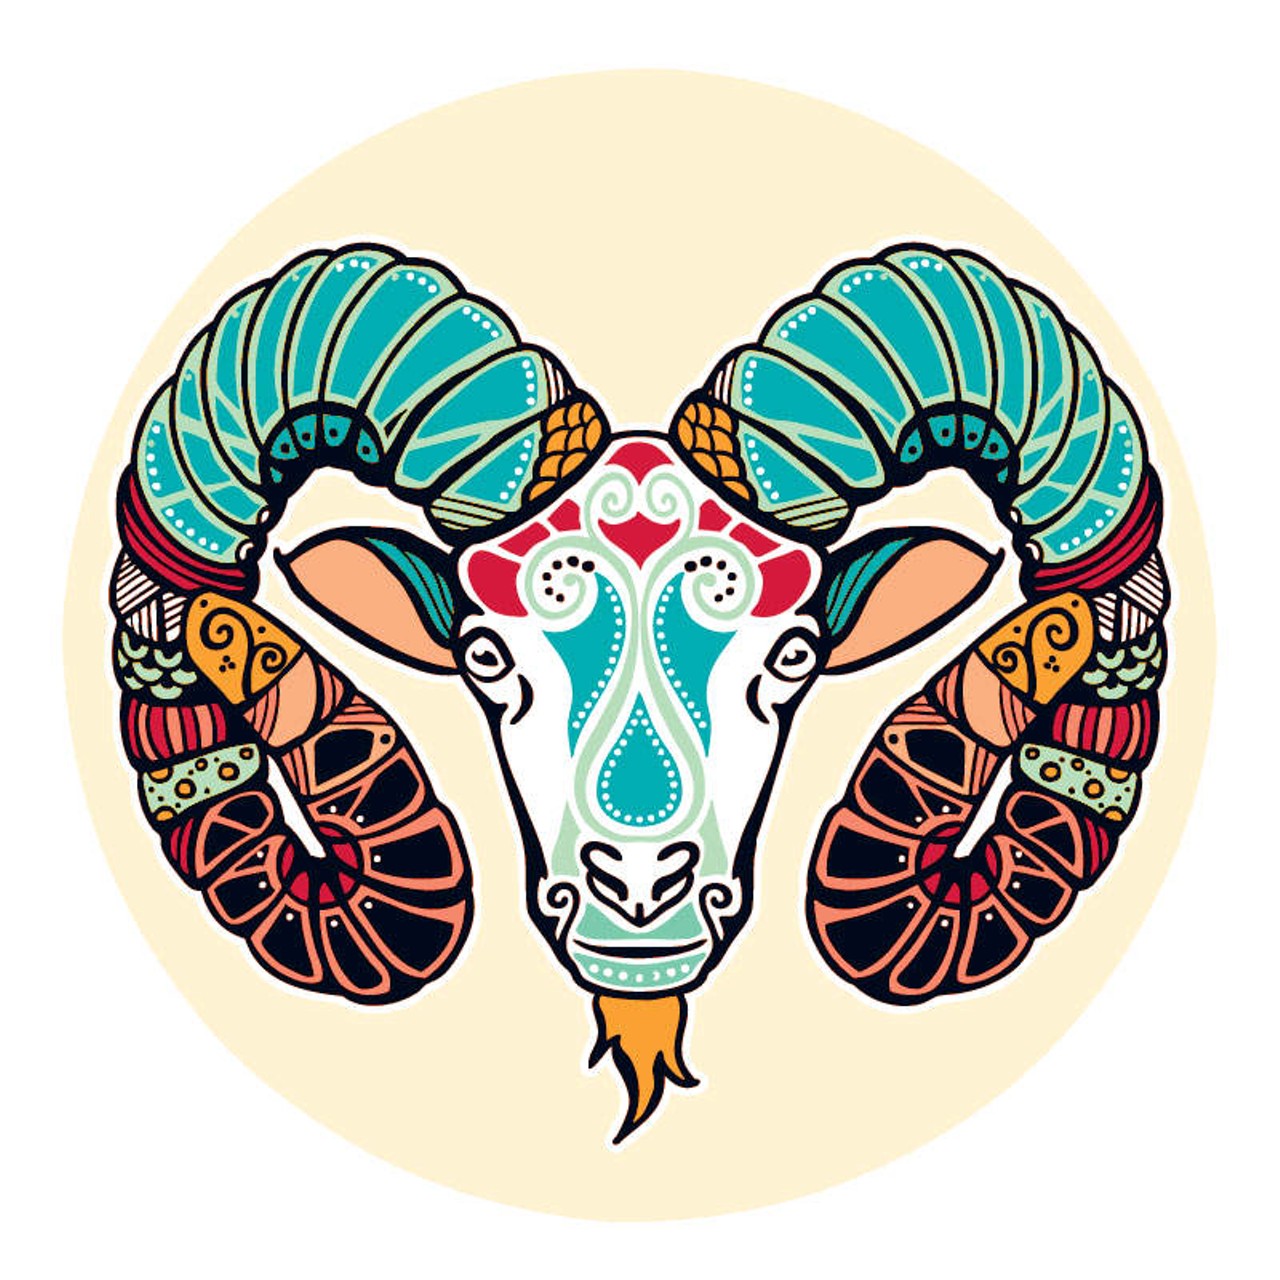 ARIES (March 21- April 20): 
You&#146;ve been involved with people and situations that make you wonder what&#146;s going on. Between the stuff that&#146;s being shoved under the rug, and the things that aren&#146;t being said, it&#146;s hard for you to understand why someone with your brains and your abilities keeps getting the shaft. At the end of the day what makes no sense at all goes all the way back to your childhood. On some level, the players in your current situation are standing in for your parents. Things will begin to make sense once you release the need to keep responding to them as you did when you were a kid.